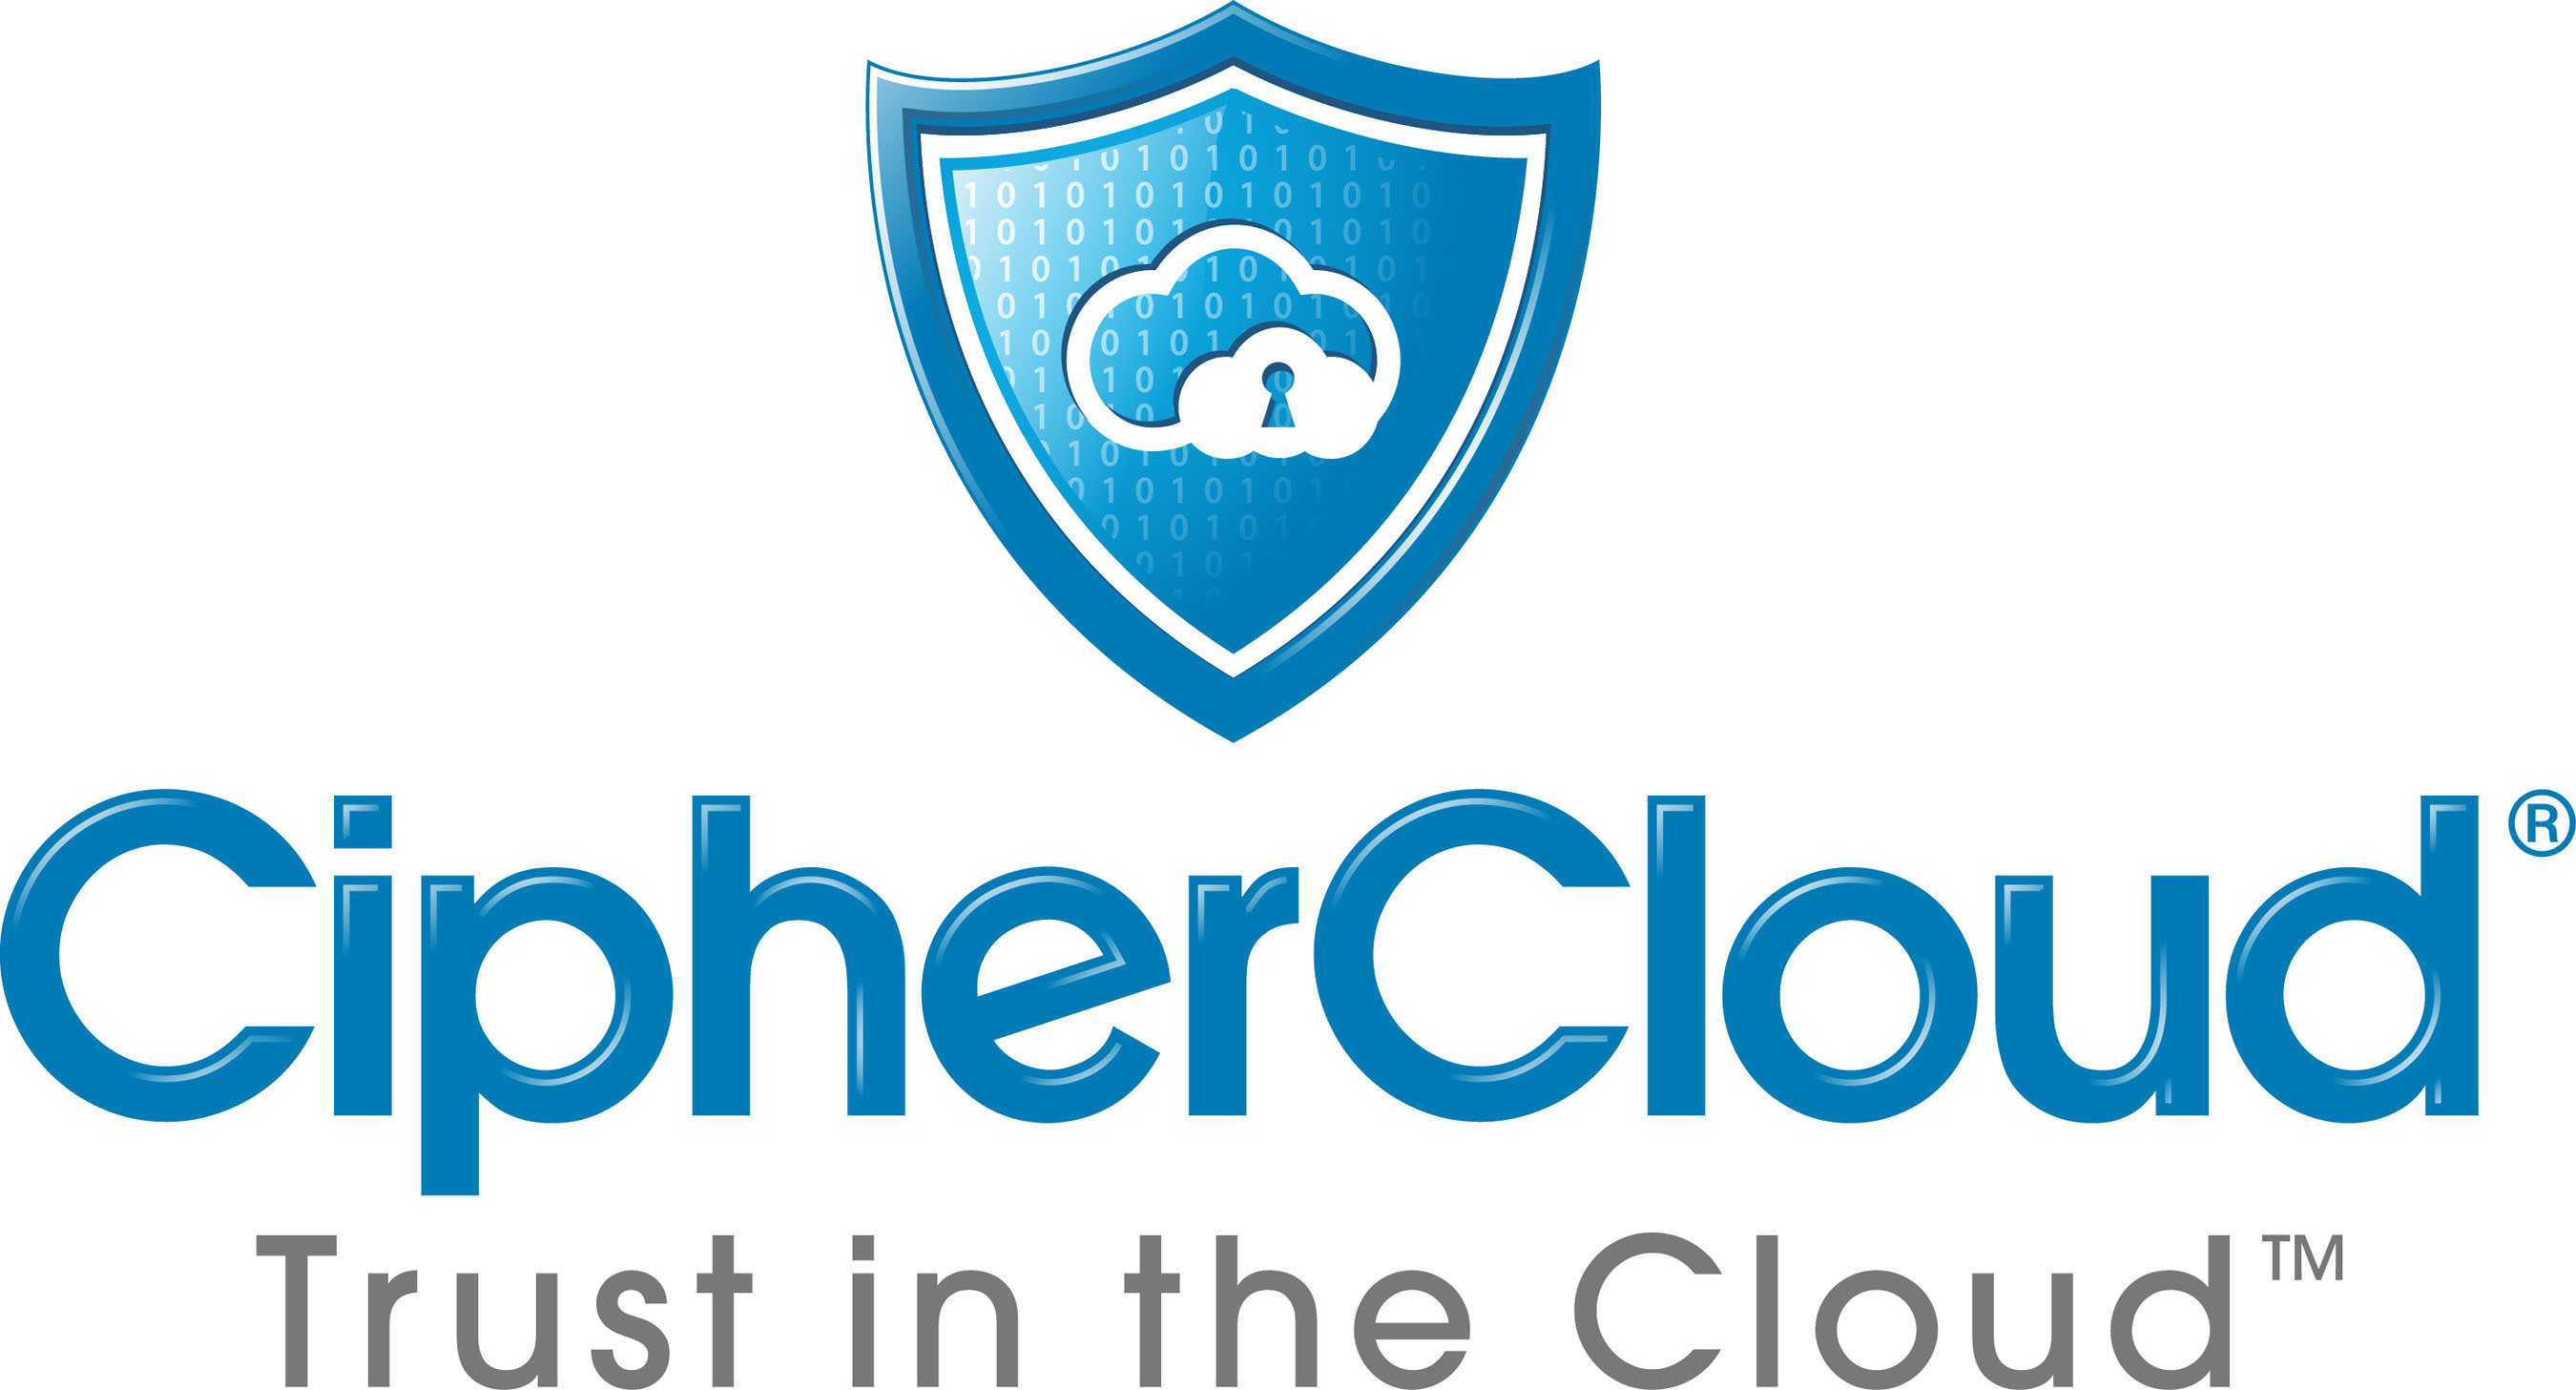 CipherCloud, the leader in cloud information protection, enables organizations to securely adopt cloud applications by overcoming data privacy, residency, security, and regulatory compliance risks. CipherCloud's open platform provides comprehensive security controls including encryption, tokenization, cloud data loss prevention, cloud malware detection, and activity monitoring. The CipherCloud product portfolio protects popular cloud applications out-of-the-box such as Salesforce, Force.com, Chatter, Box, Google Gmail, Microsoft Office 365, and Amazon Web Services. CipherCloud's ground breaking technology protects sensitive information in real time, before it is sent to the cloud, while preserving application usability and functionality for its more than 1.2 million business users. (PRNewsFoto/CipherCloud) (PRNewsFoto/)